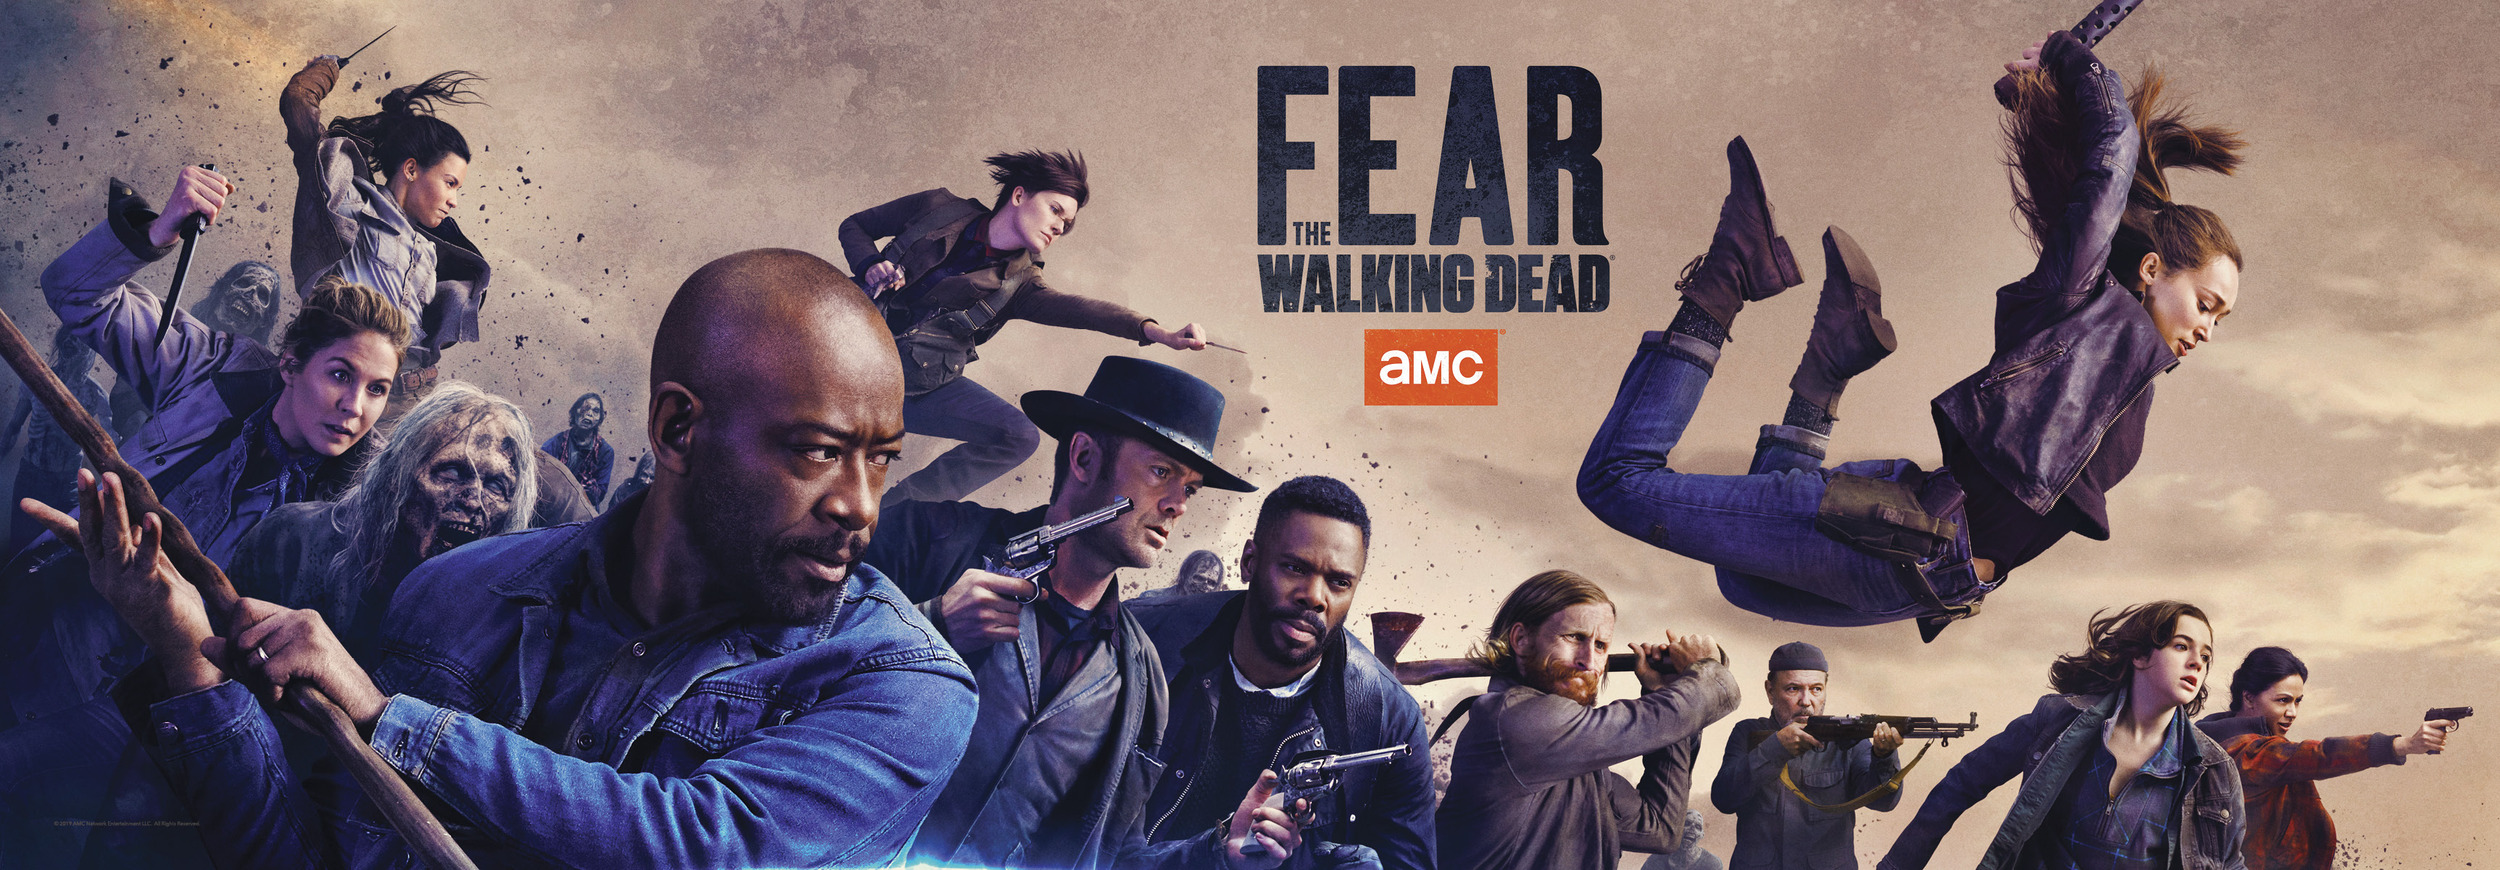 Mega Sized TV Poster Image for Fear the Walking Dead (#12 of 17)